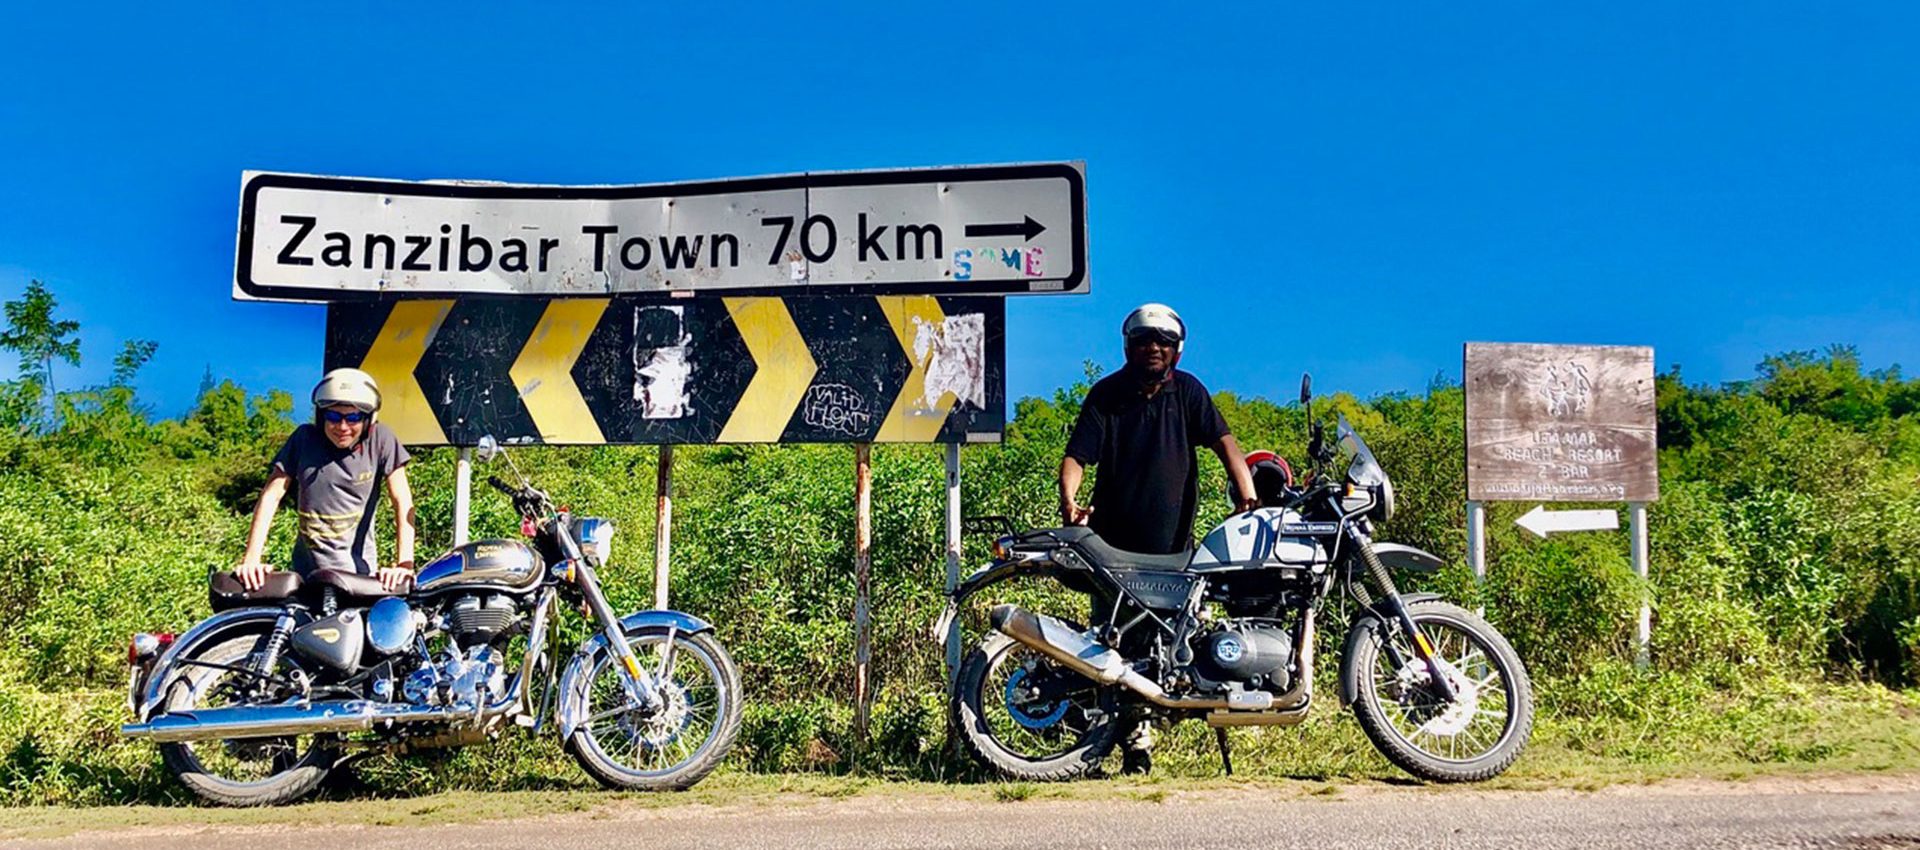 Discovering the Spice Island on two wheels.